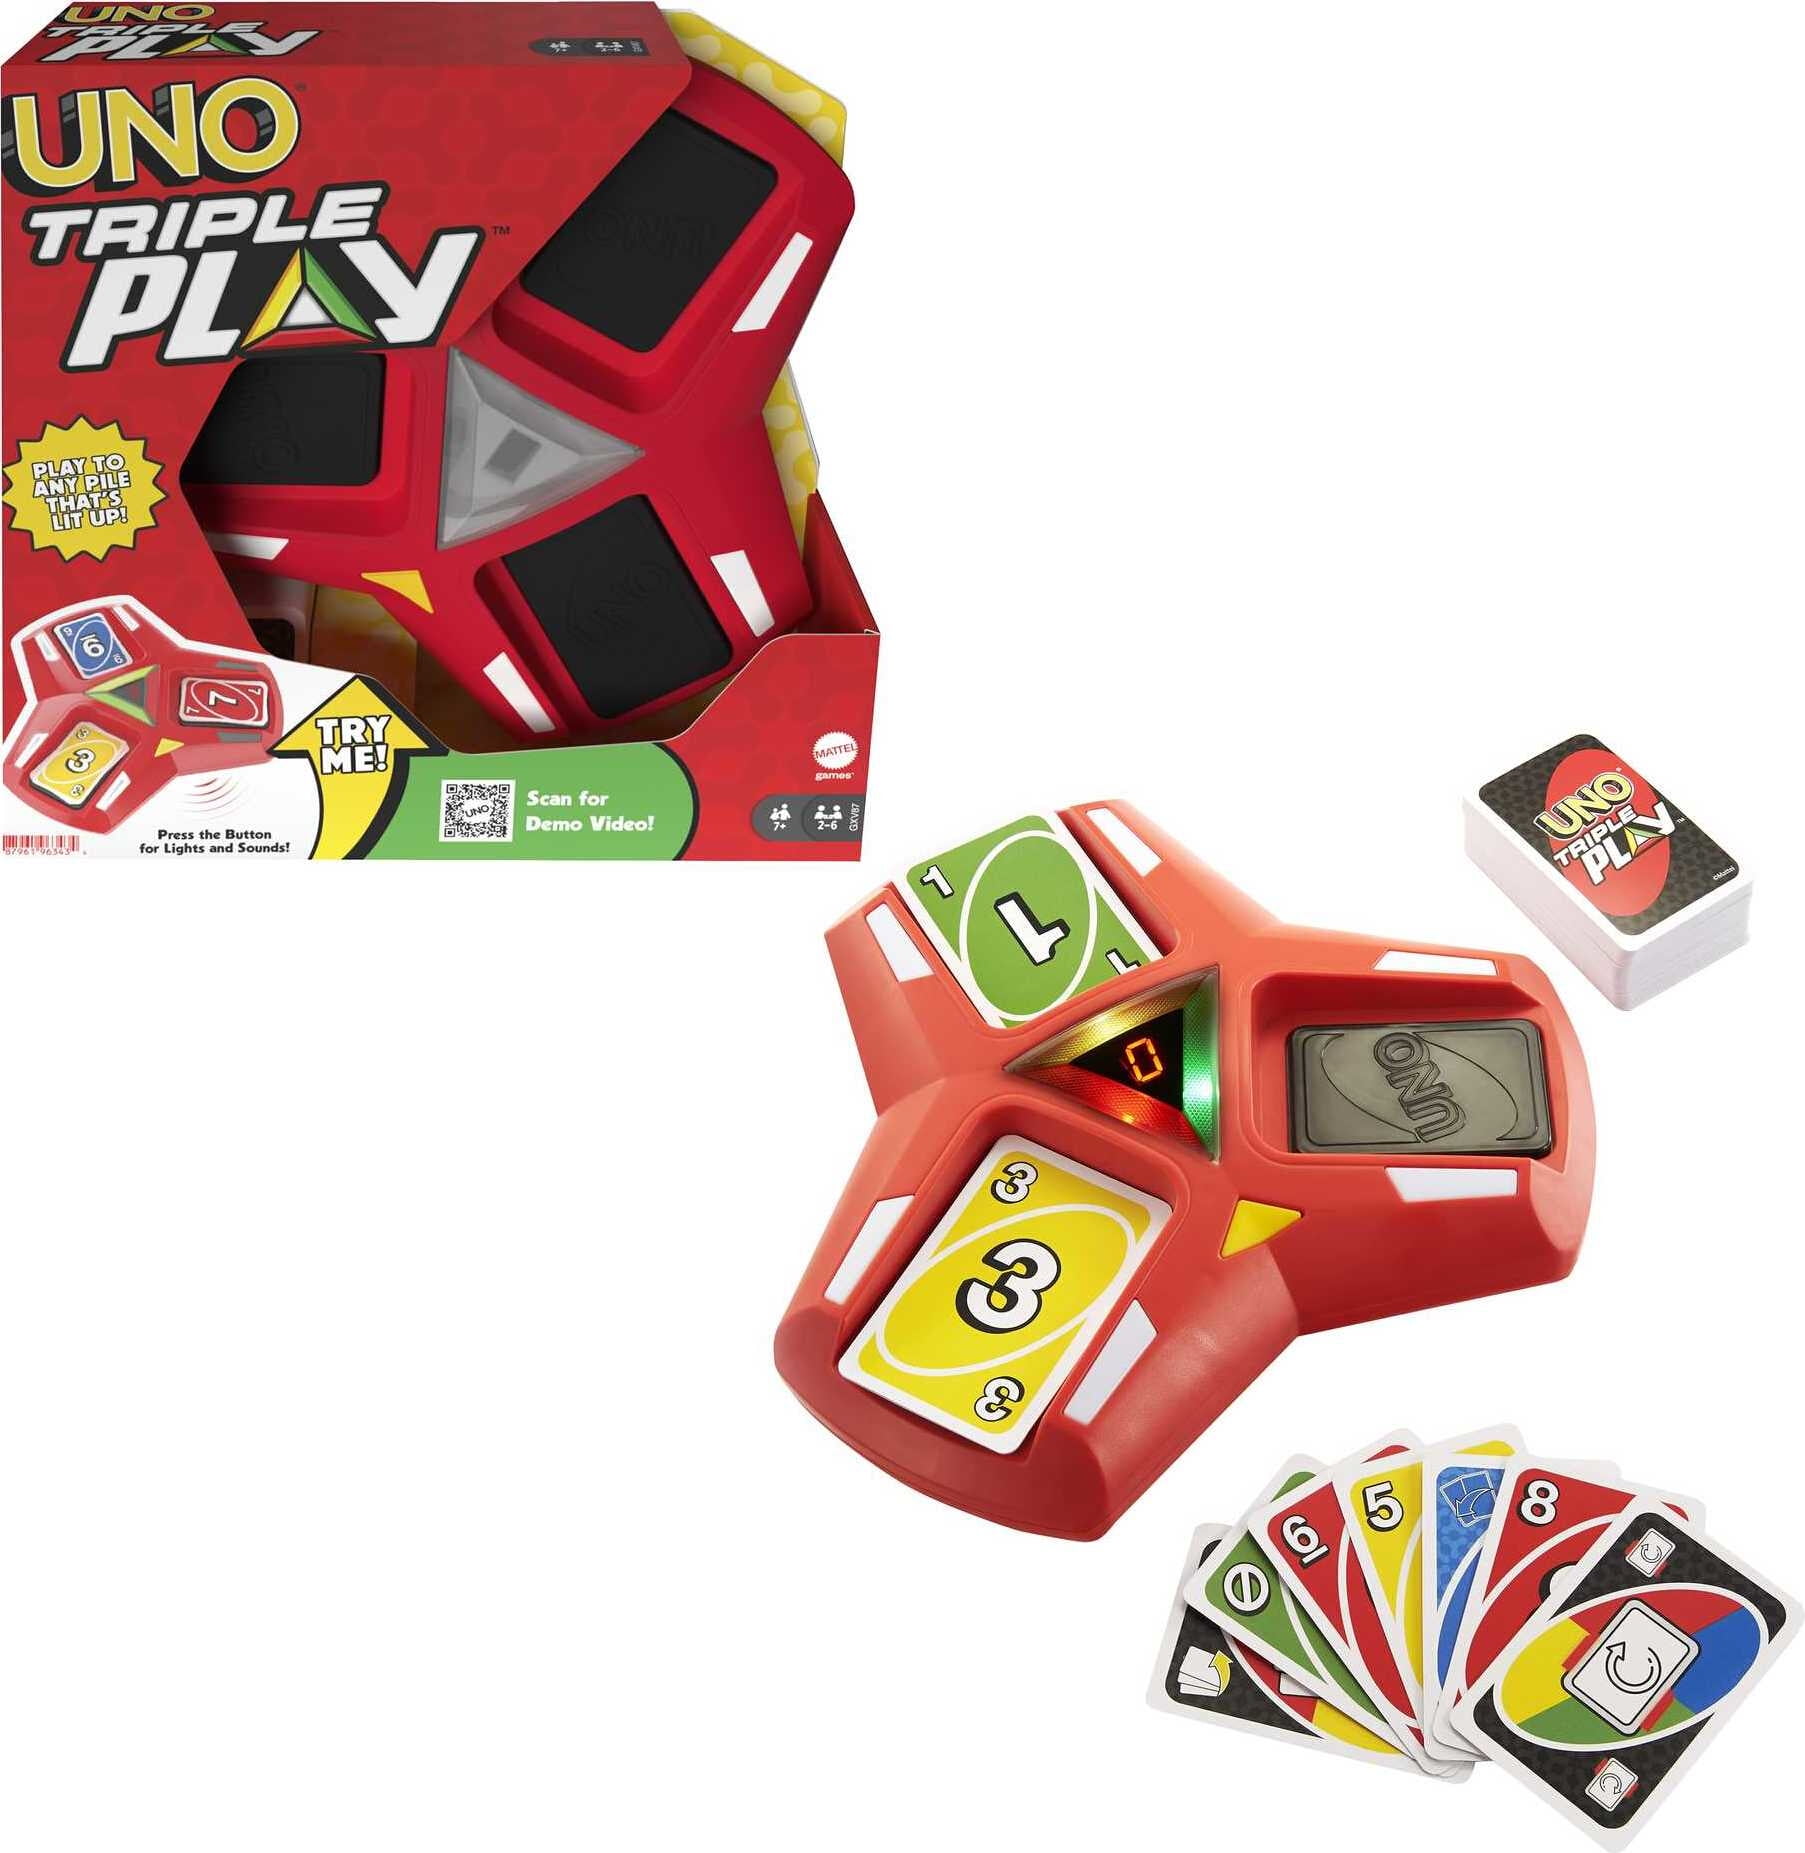 UNO Triple Play Card Game, Game for Family Night, Lights and Sounds